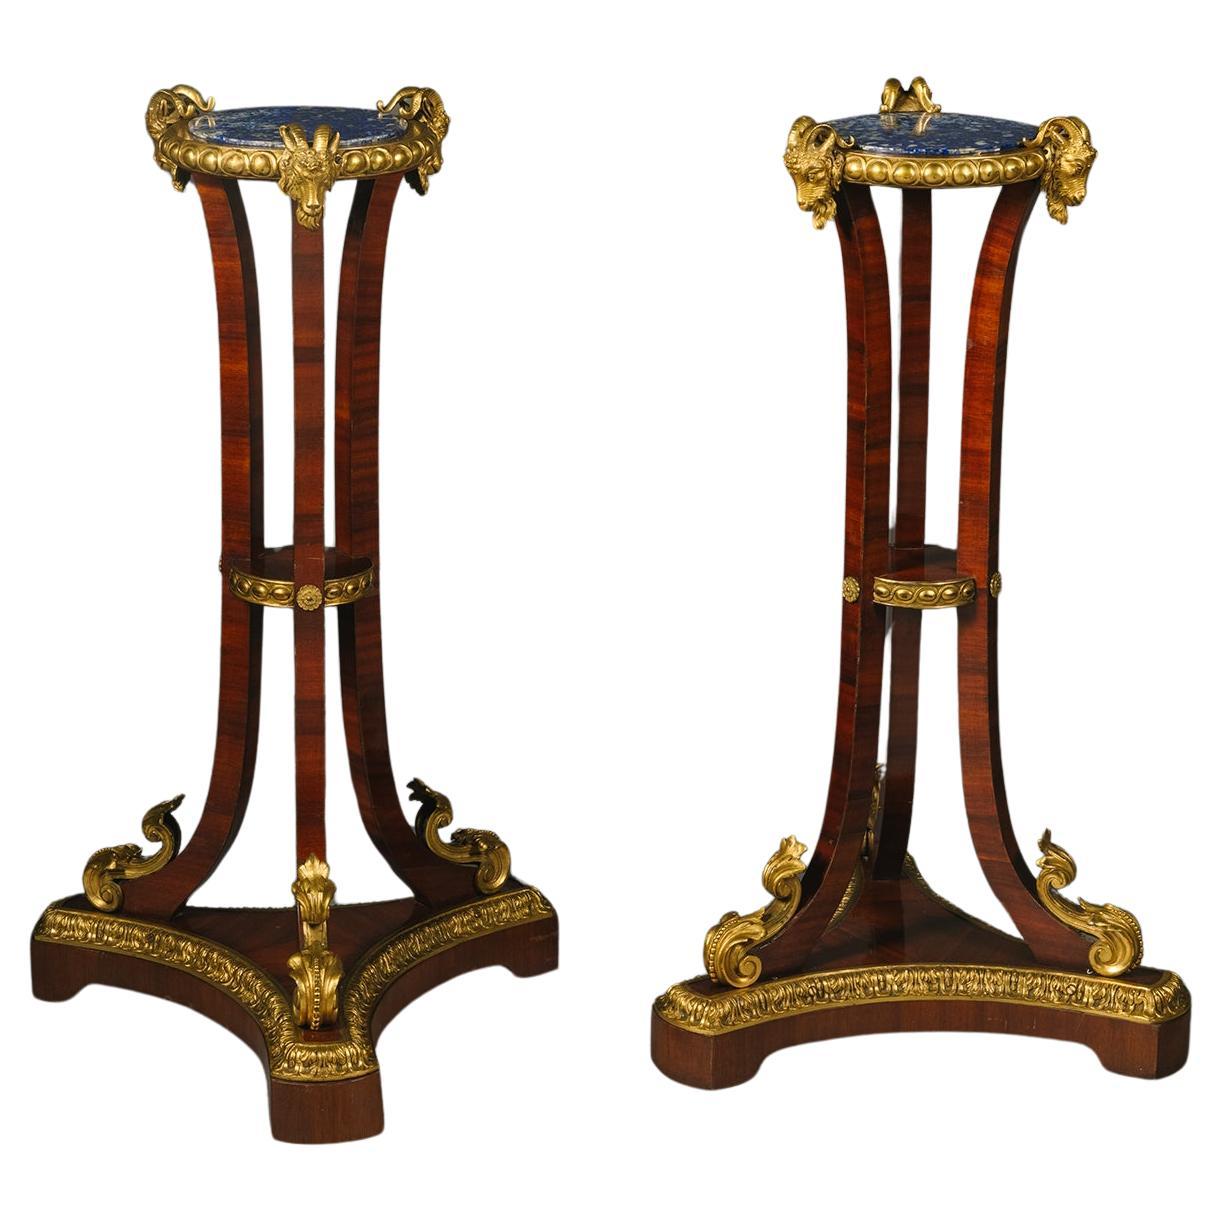 A Pair of Louis Philippe Period Gilt-Bronze, Mahogany and Lapis Guéridons